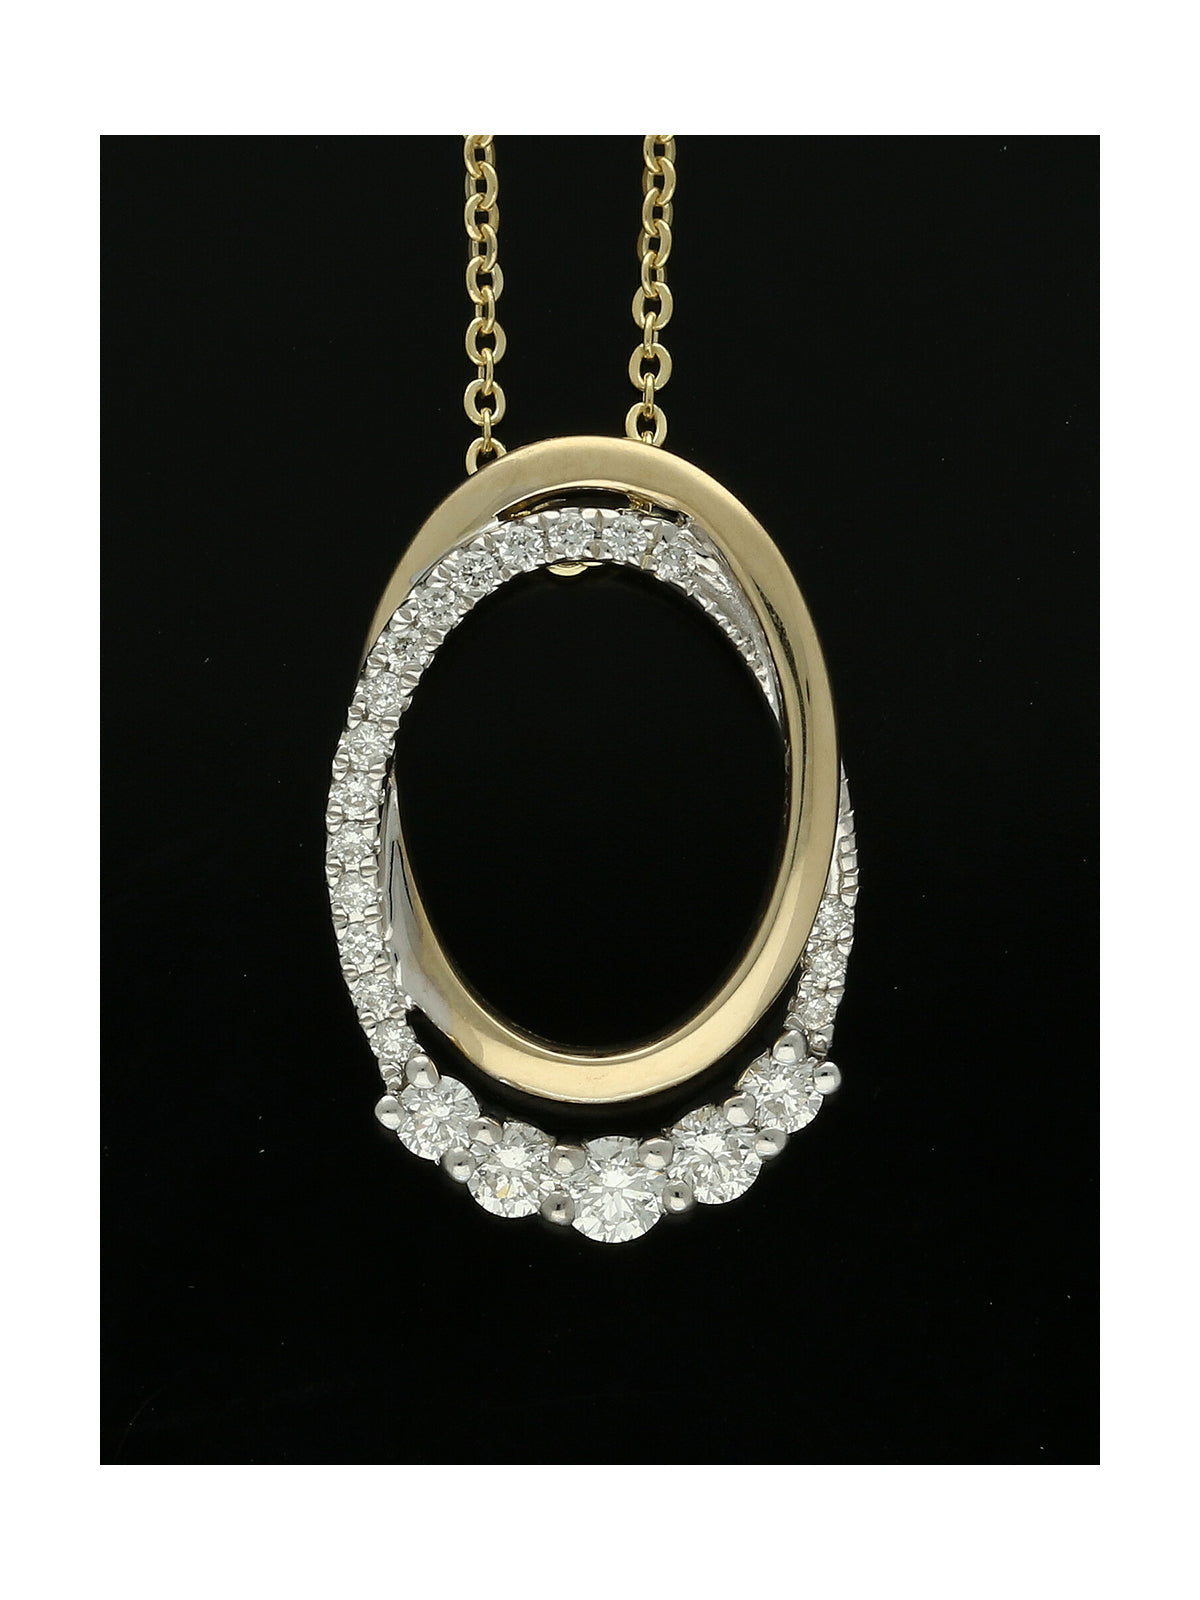 Diamond Oval Pendant Necklace in 9ct Yellow & White Gold